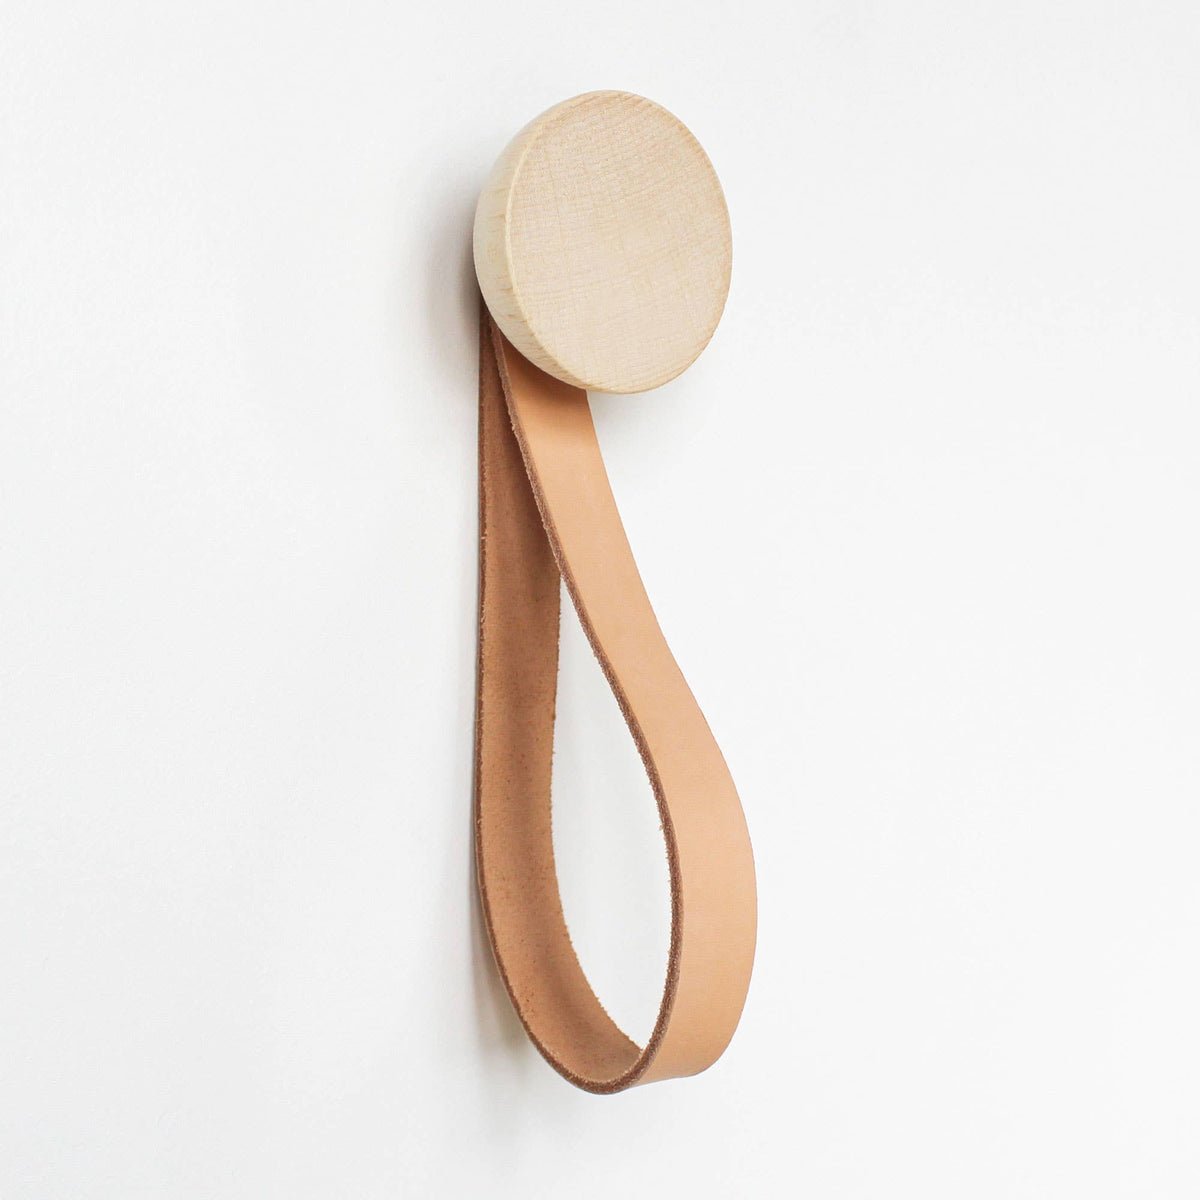 Beech Wood Wall Mounted Coat Hook With Leather Strap - Holistic Habitat 